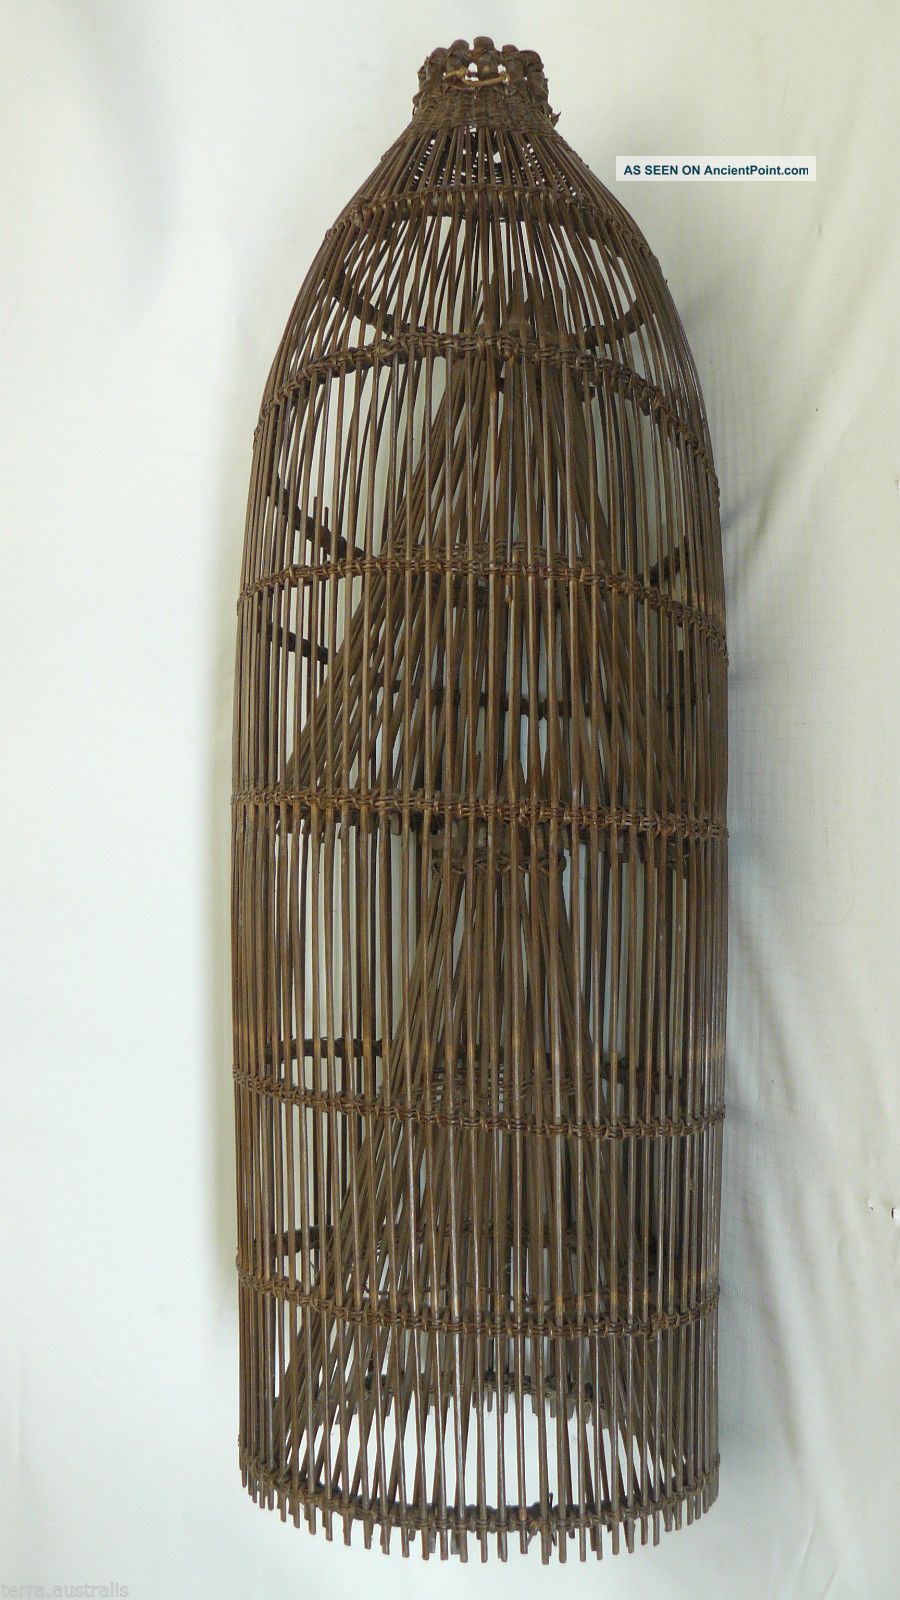 Antique South Pacific Islands Wicker Fishing Trap Catcher - Rattan Reed Fish Pacific Islands & Oceania photo